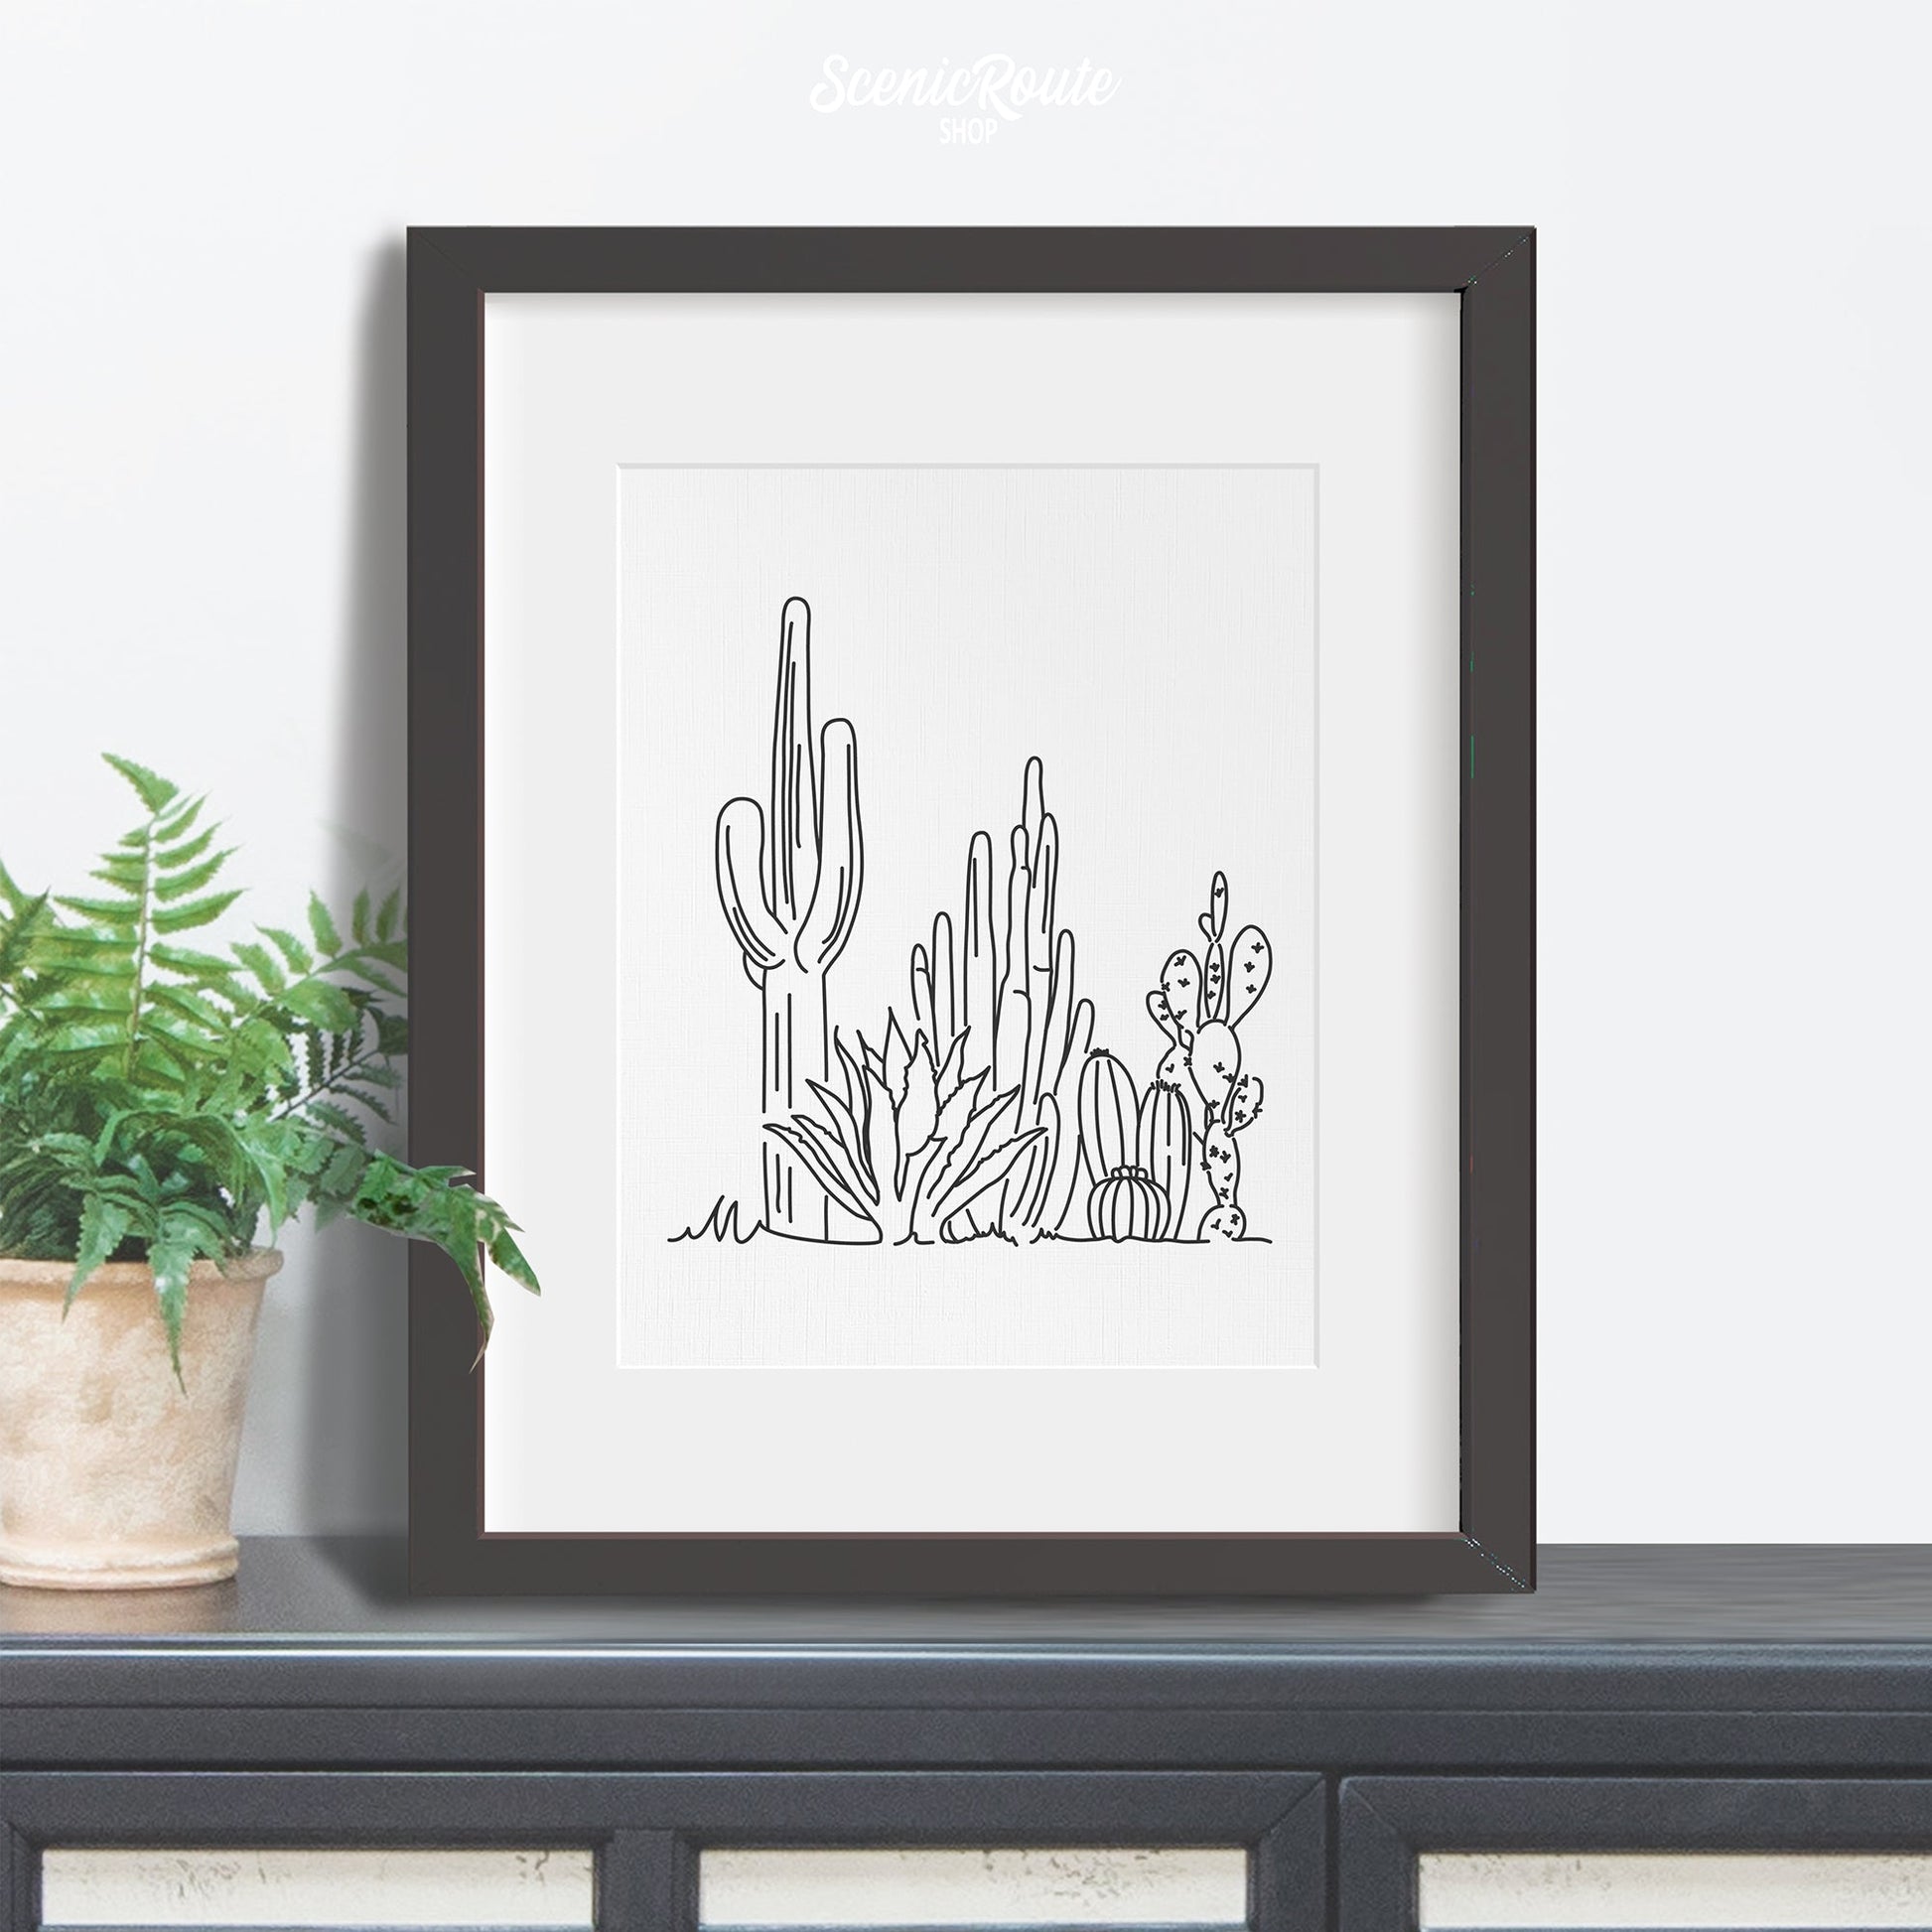 A framed line art drawing of a Cactus Garden on a credenza with plant